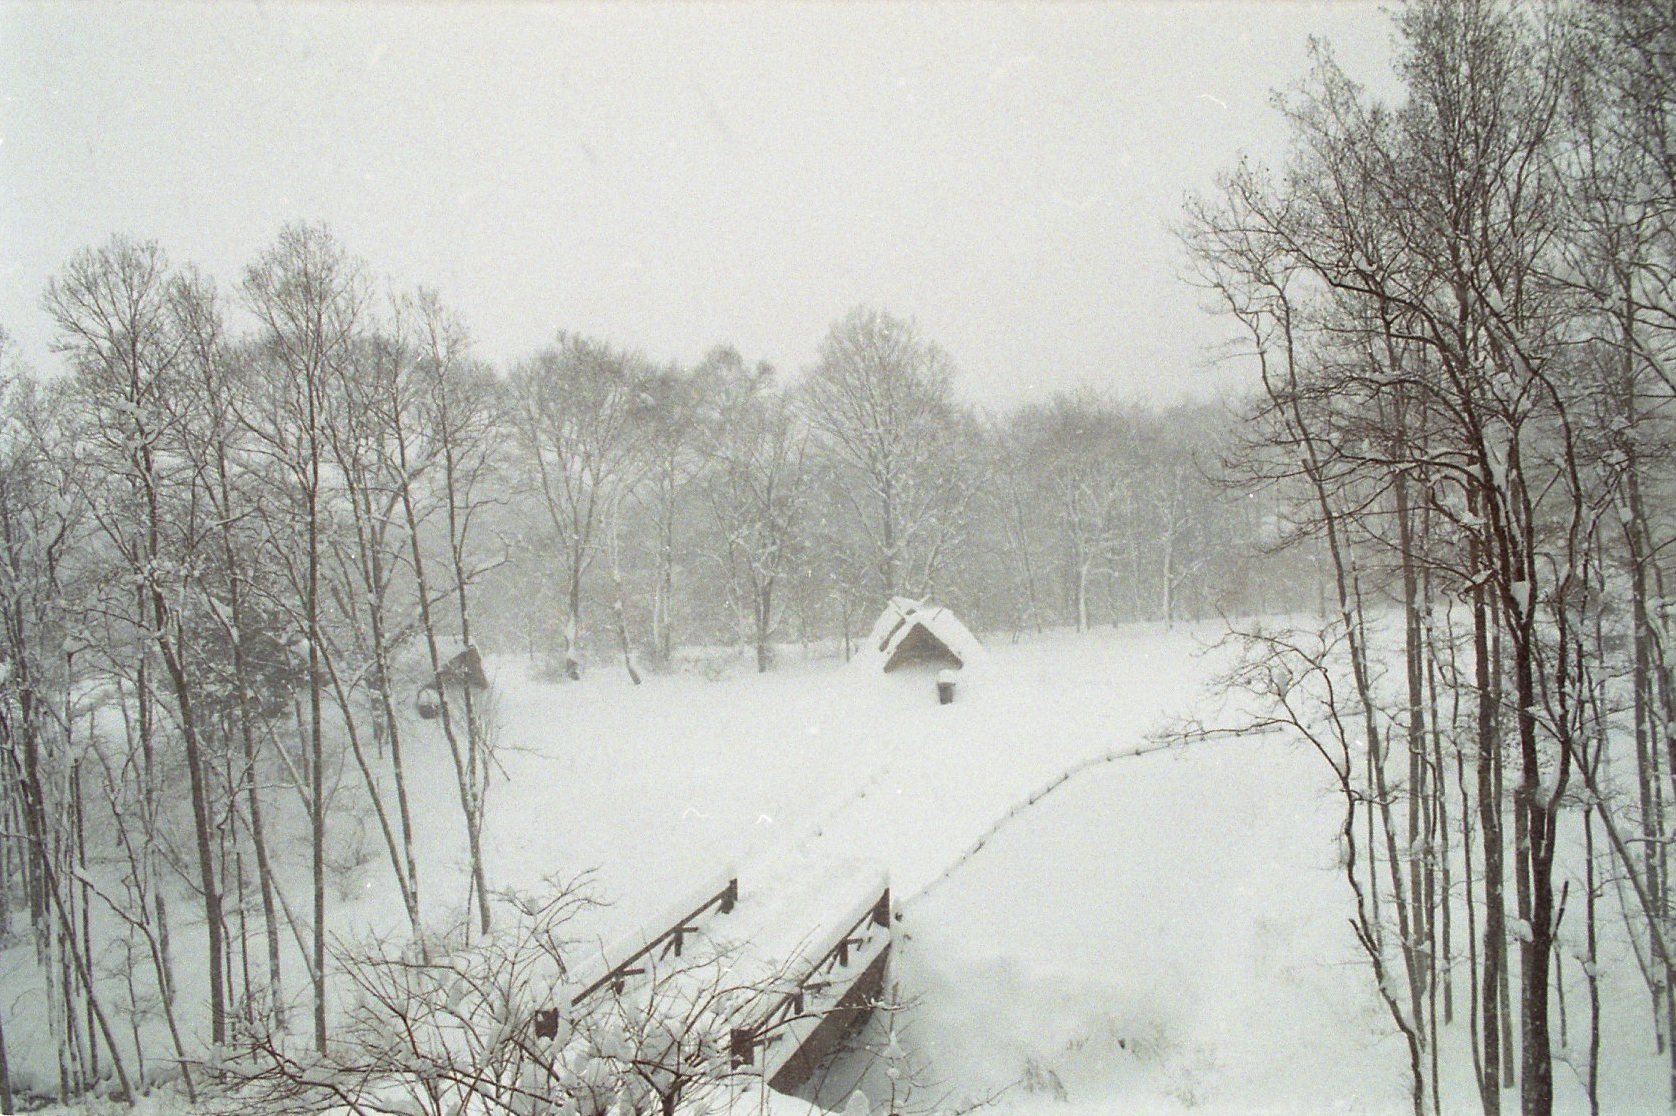 The Yosukeone reconstructed houses in snow